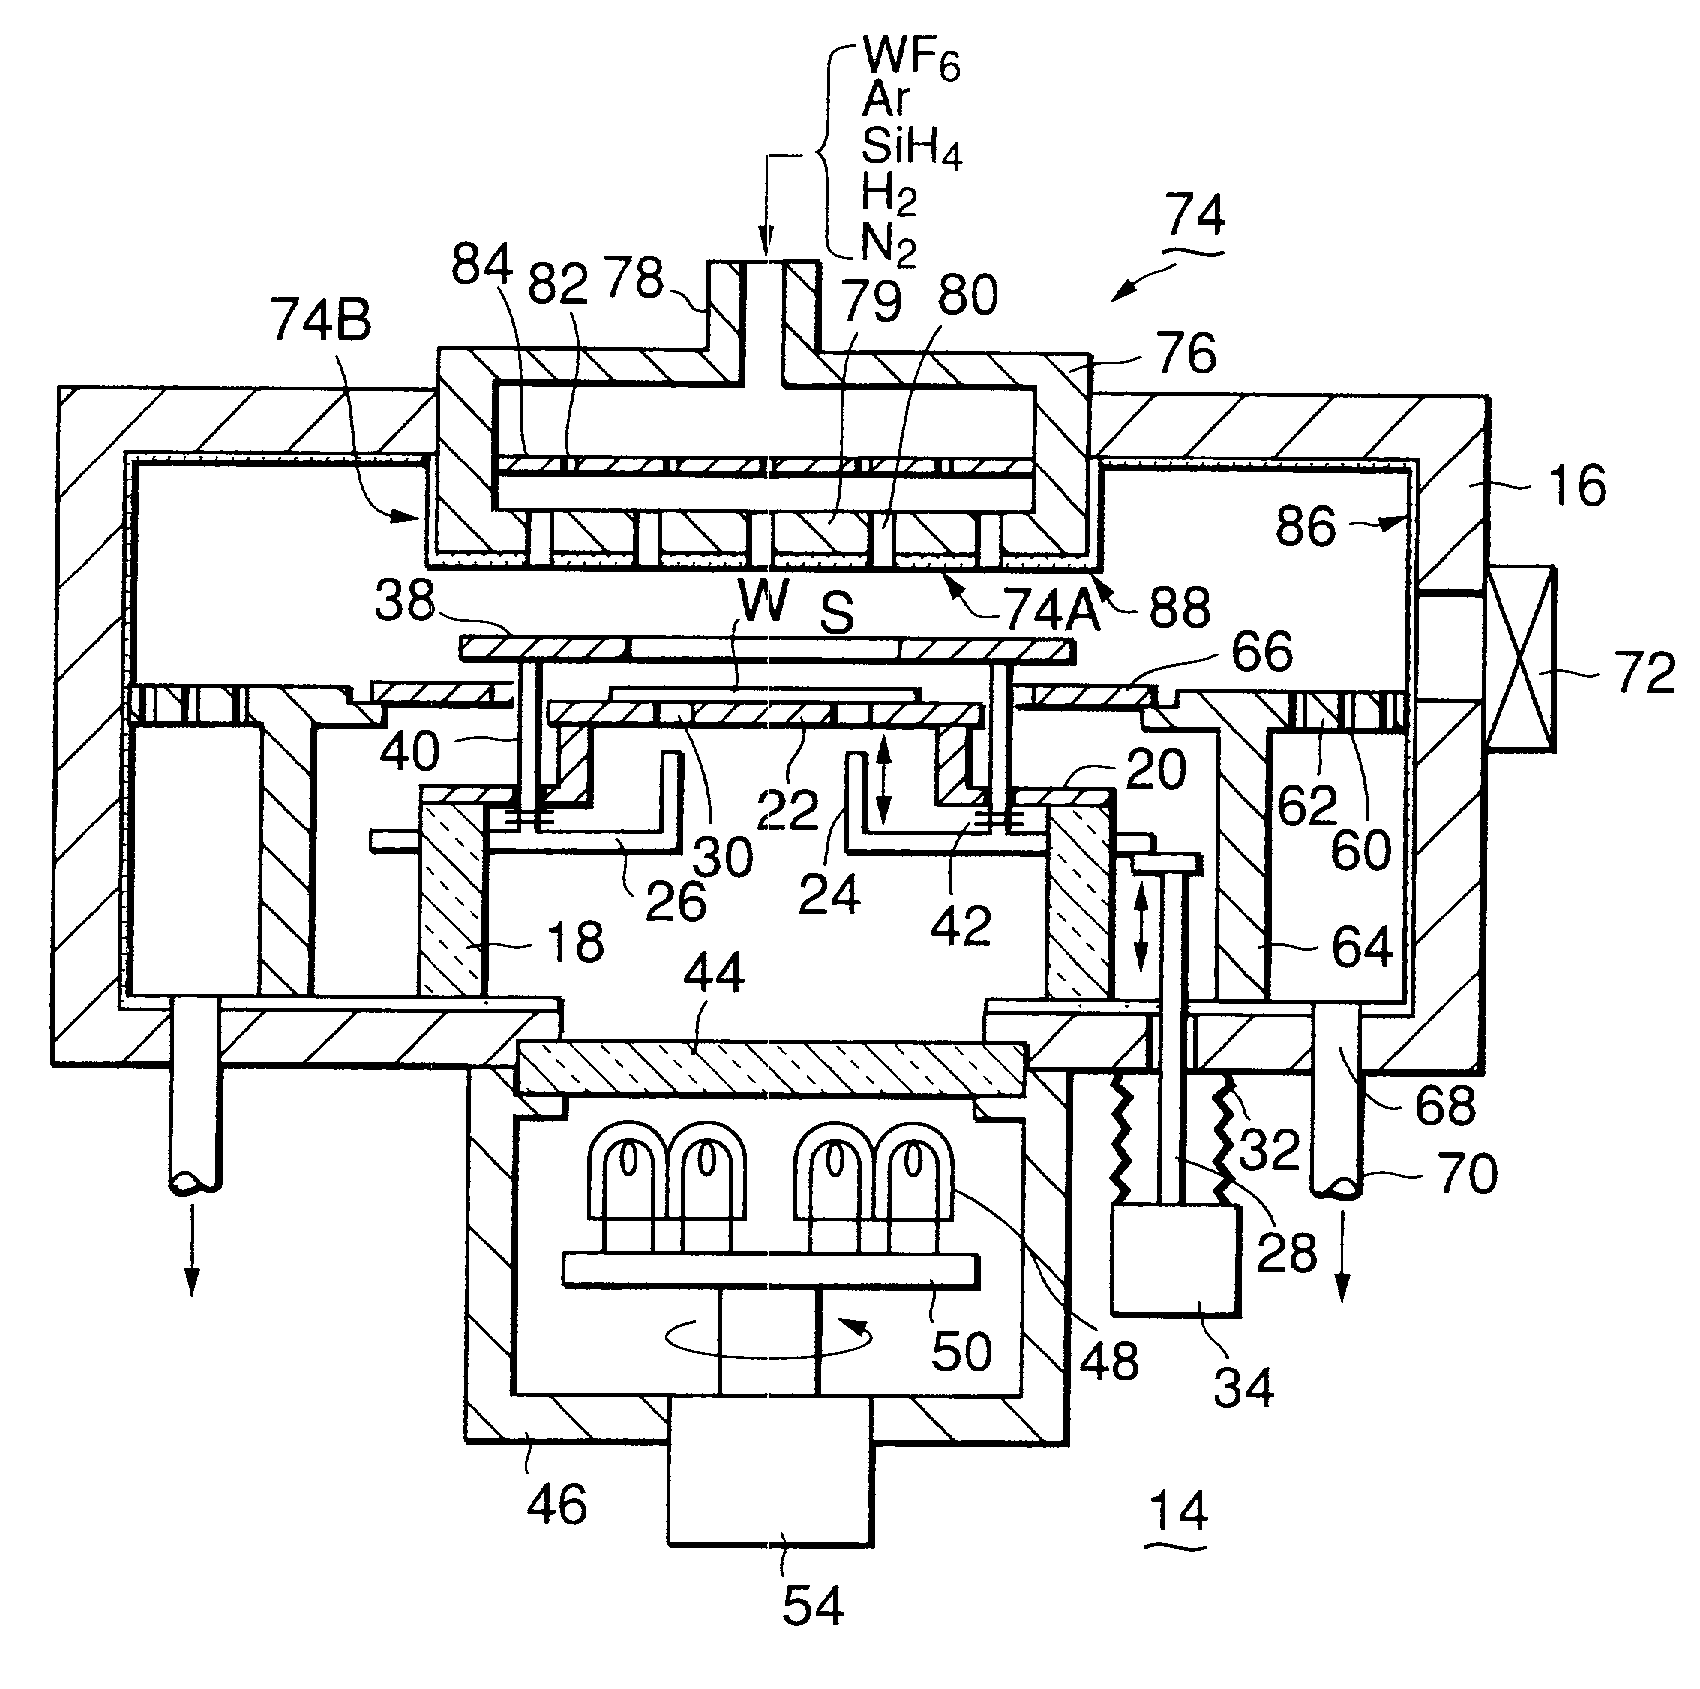 Method of manufacturing a processing apparatus